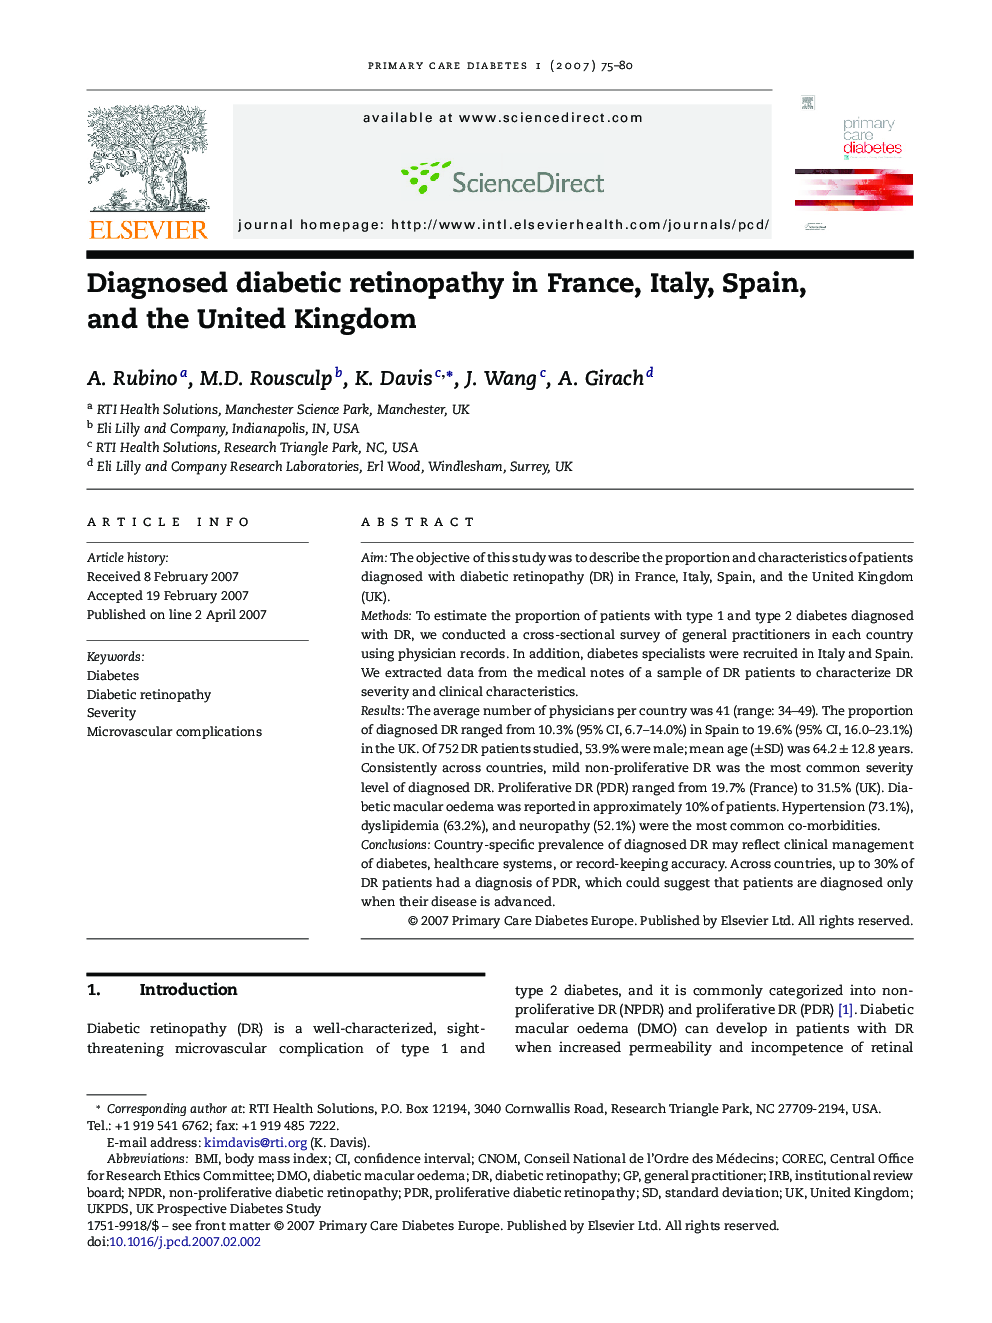 Diagnosed diabetic retinopathy in France, Italy, Spain, and the United Kingdom